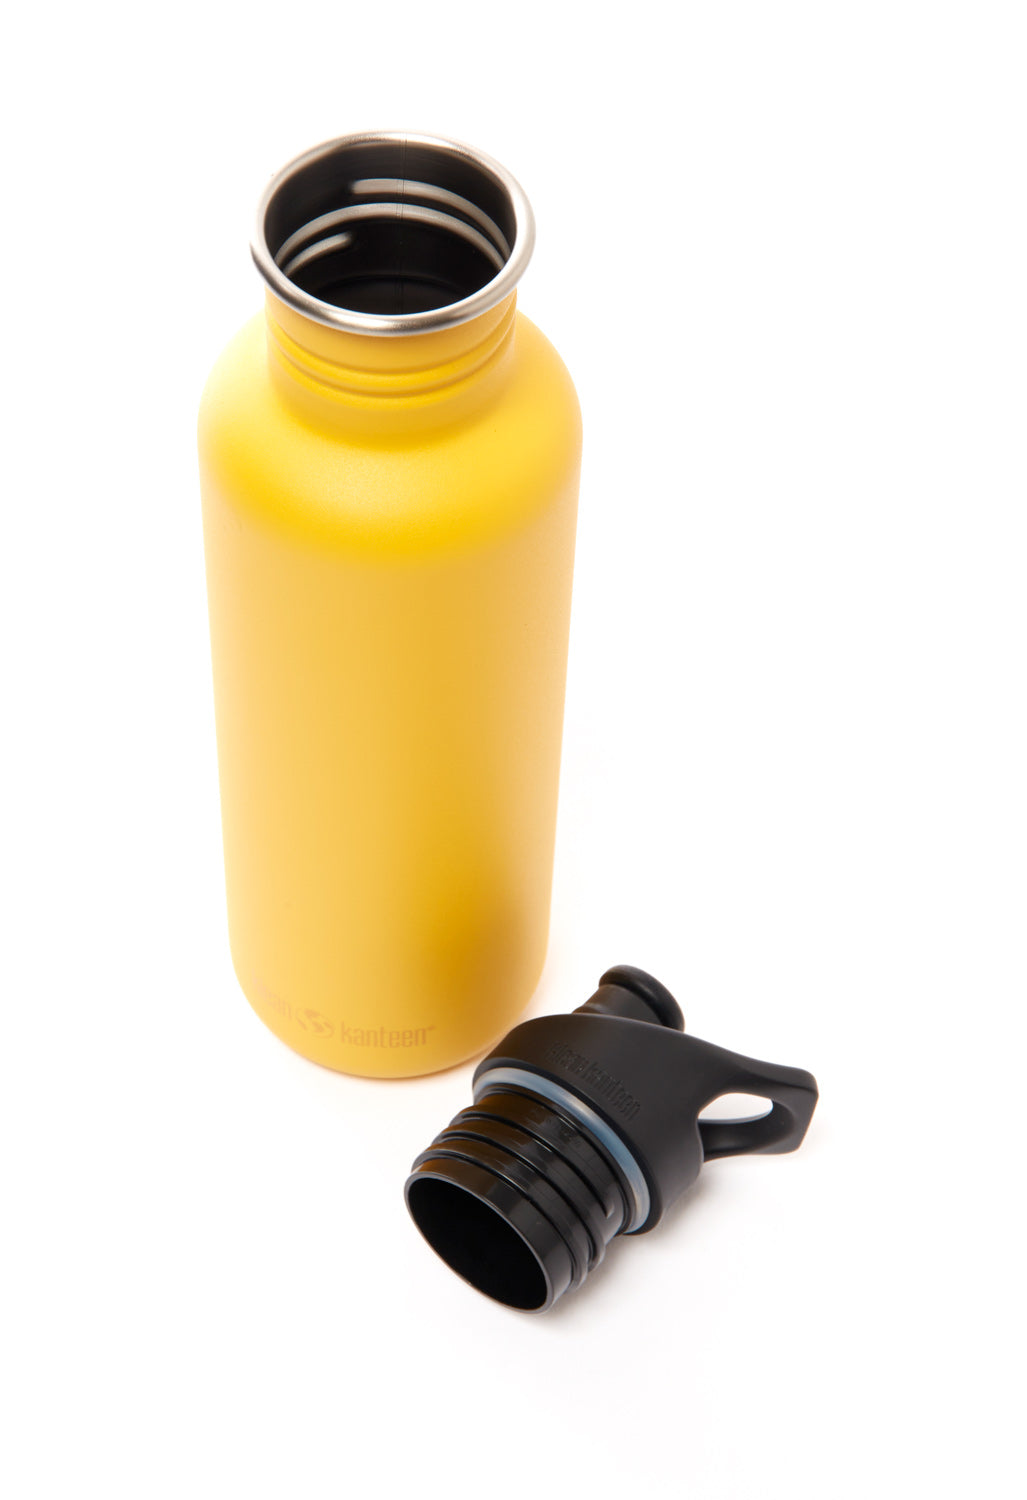 Klean Kanteen Classic 800ml with Sport Cap - Old Gold